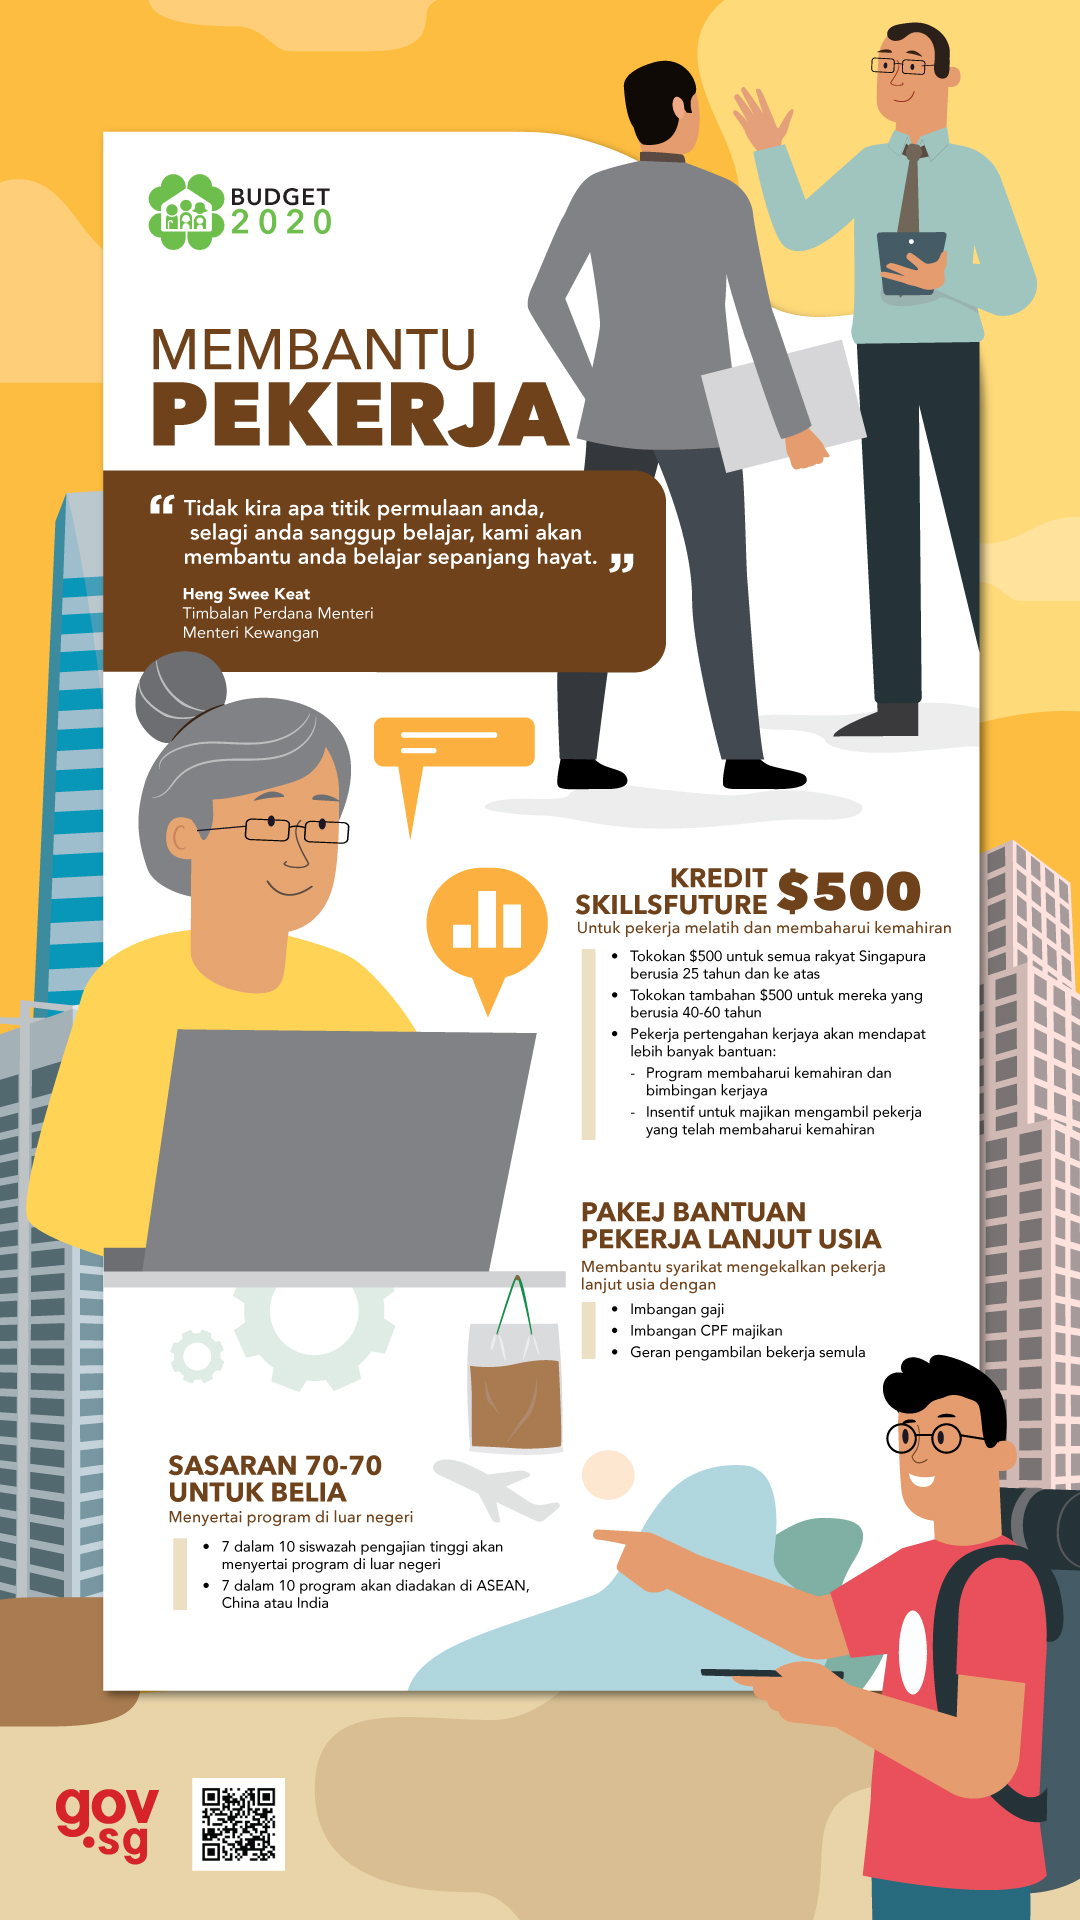 Malay - Helping workers stay employed and have good jobs